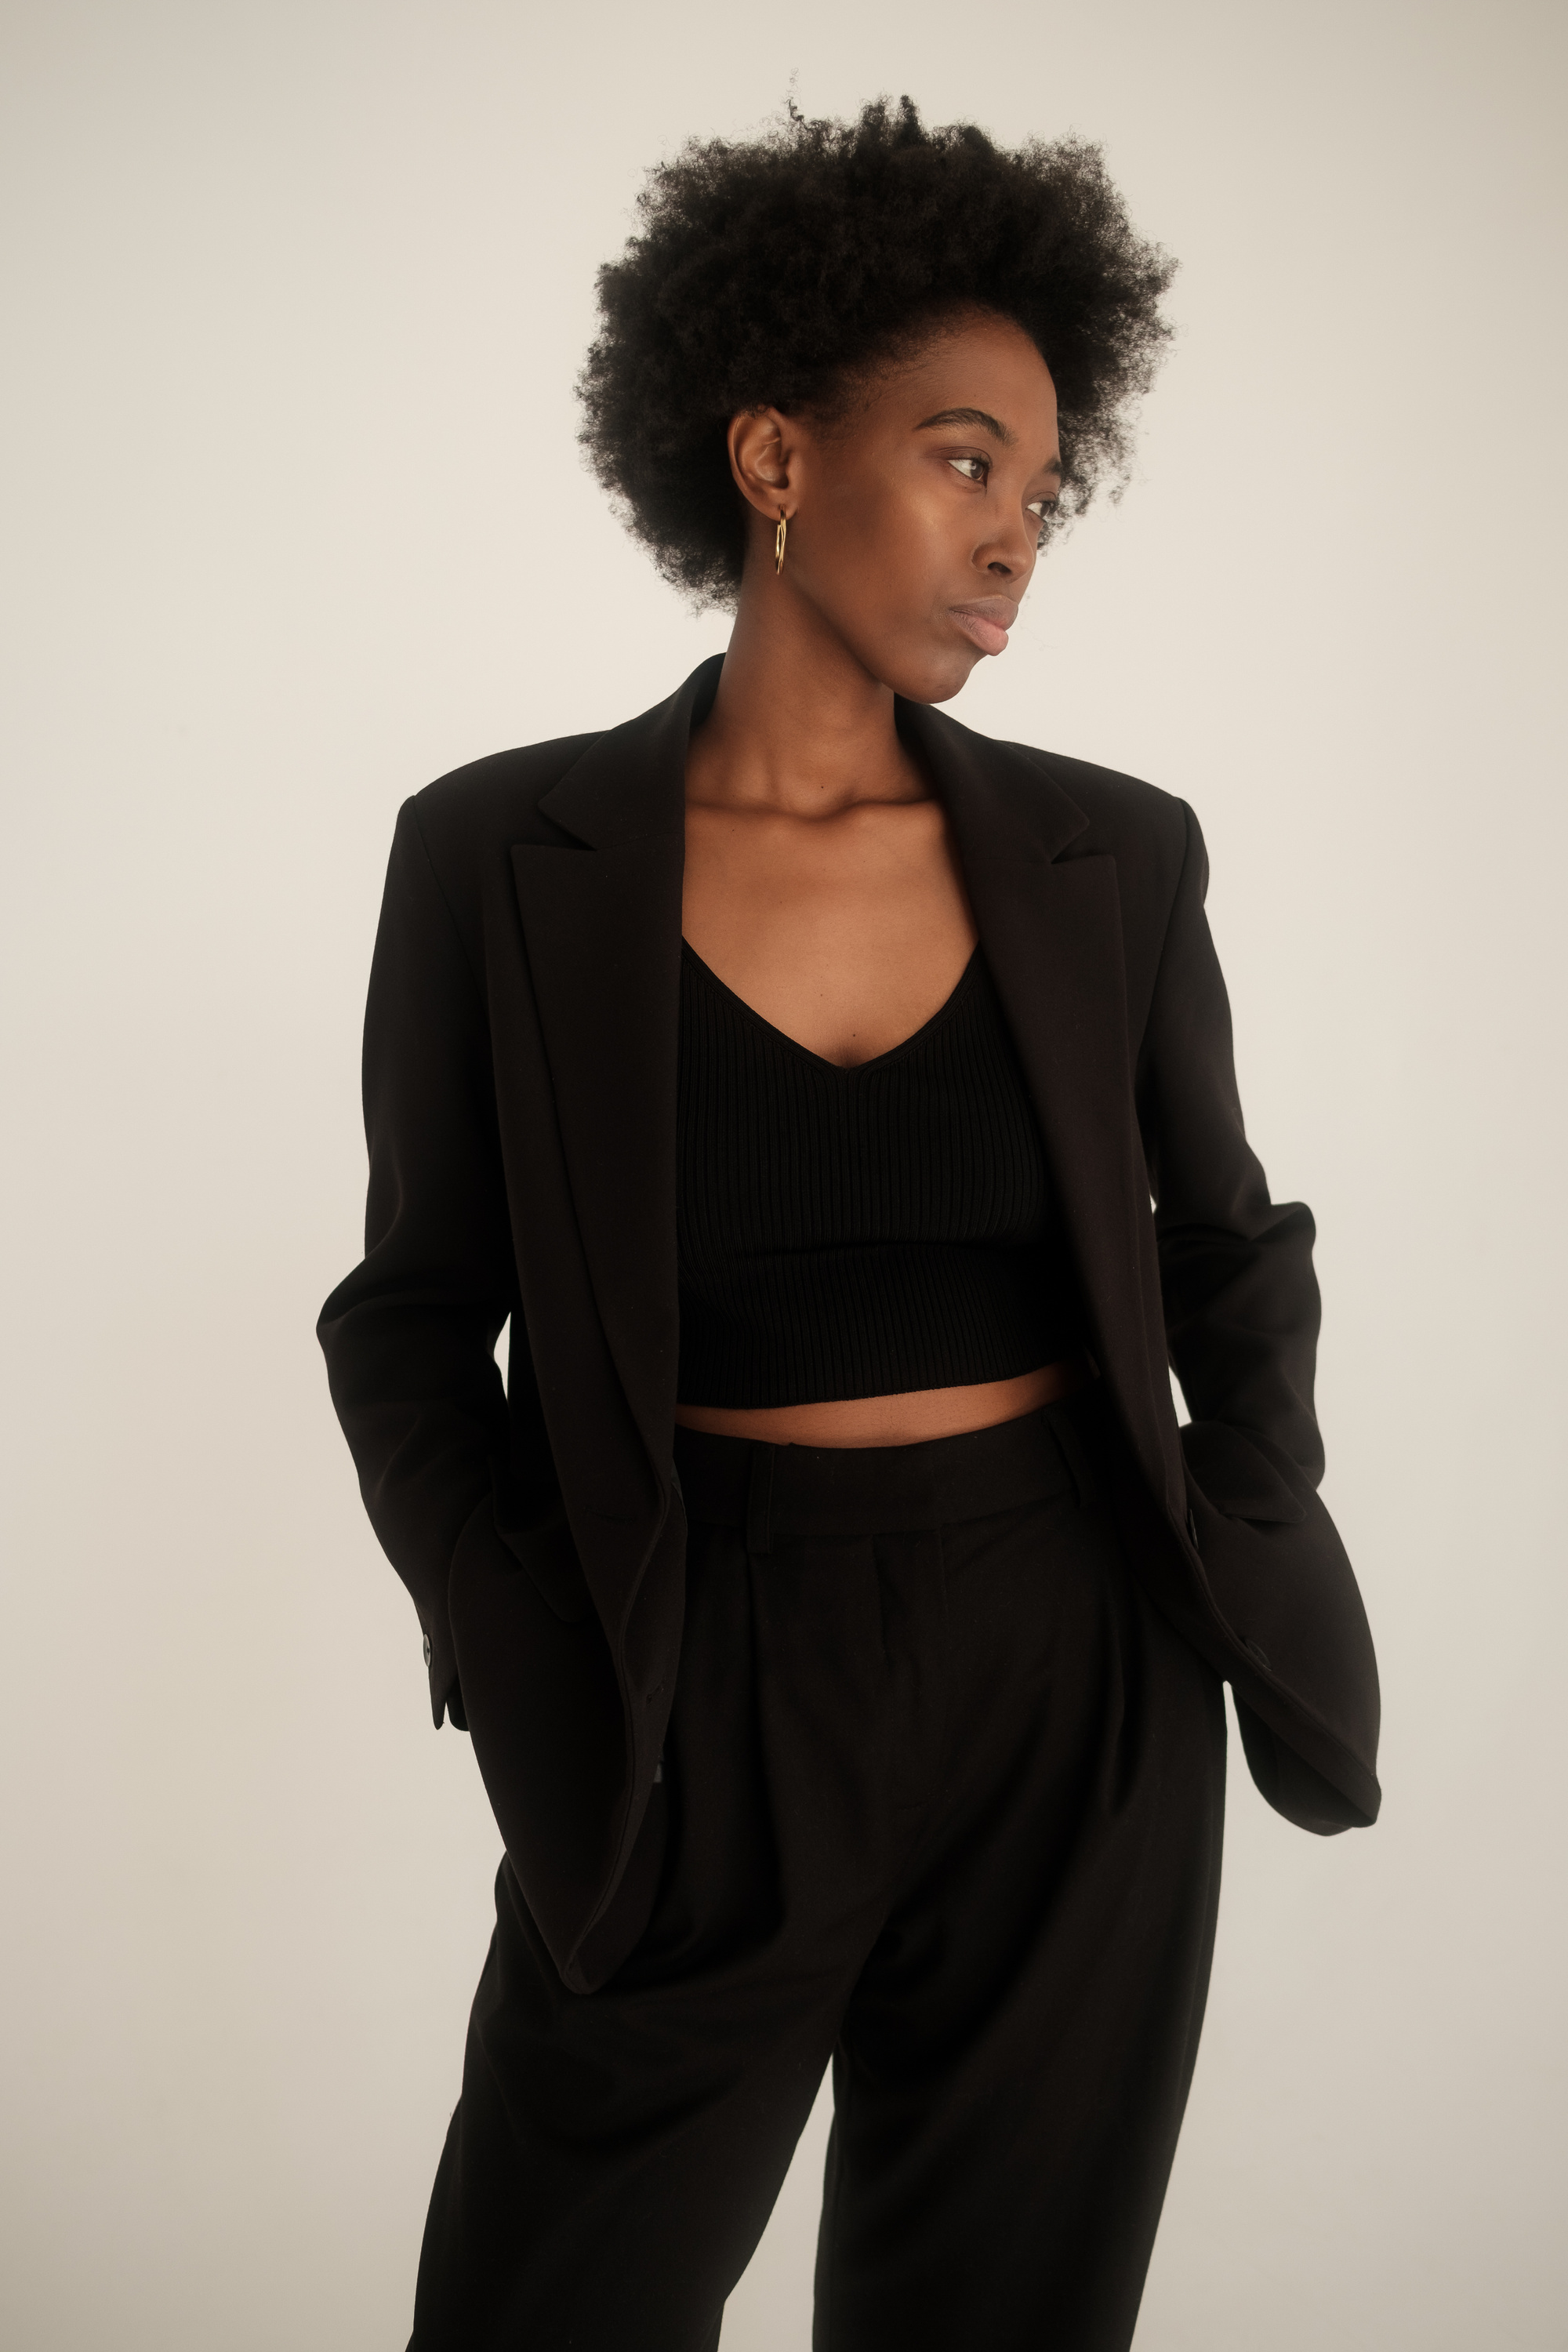 Woman in Black Blazer and Crop Top 